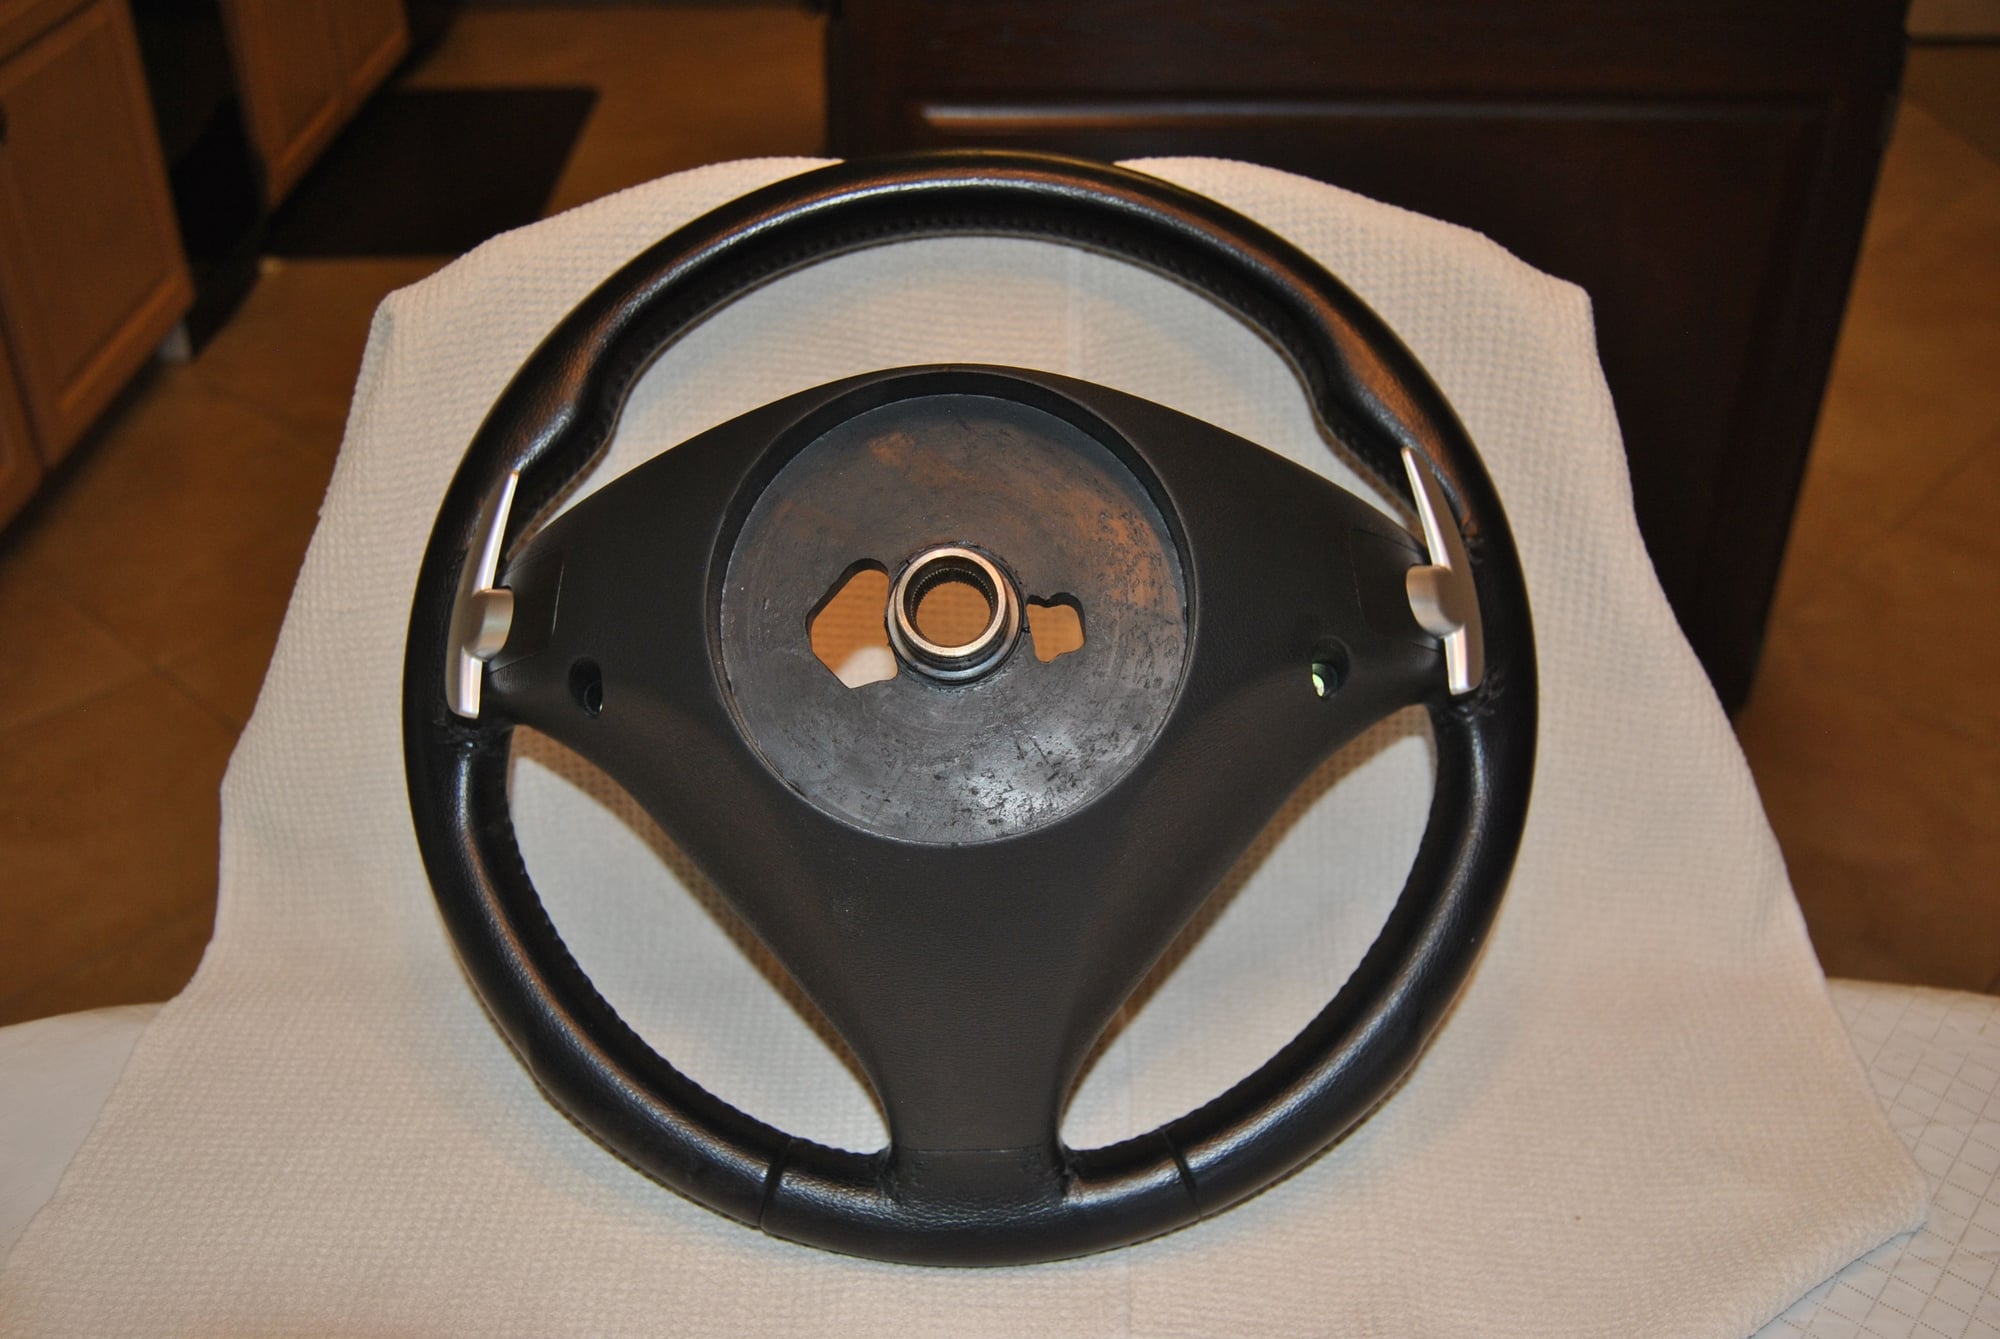 Interior/Upholstery - 2005-2006 Mercedes Benz C55 AMG Steering Wheel - Used - 2005 to 2006 Mercedes-Benz C55 AMG - Upland, CA 91784, United States